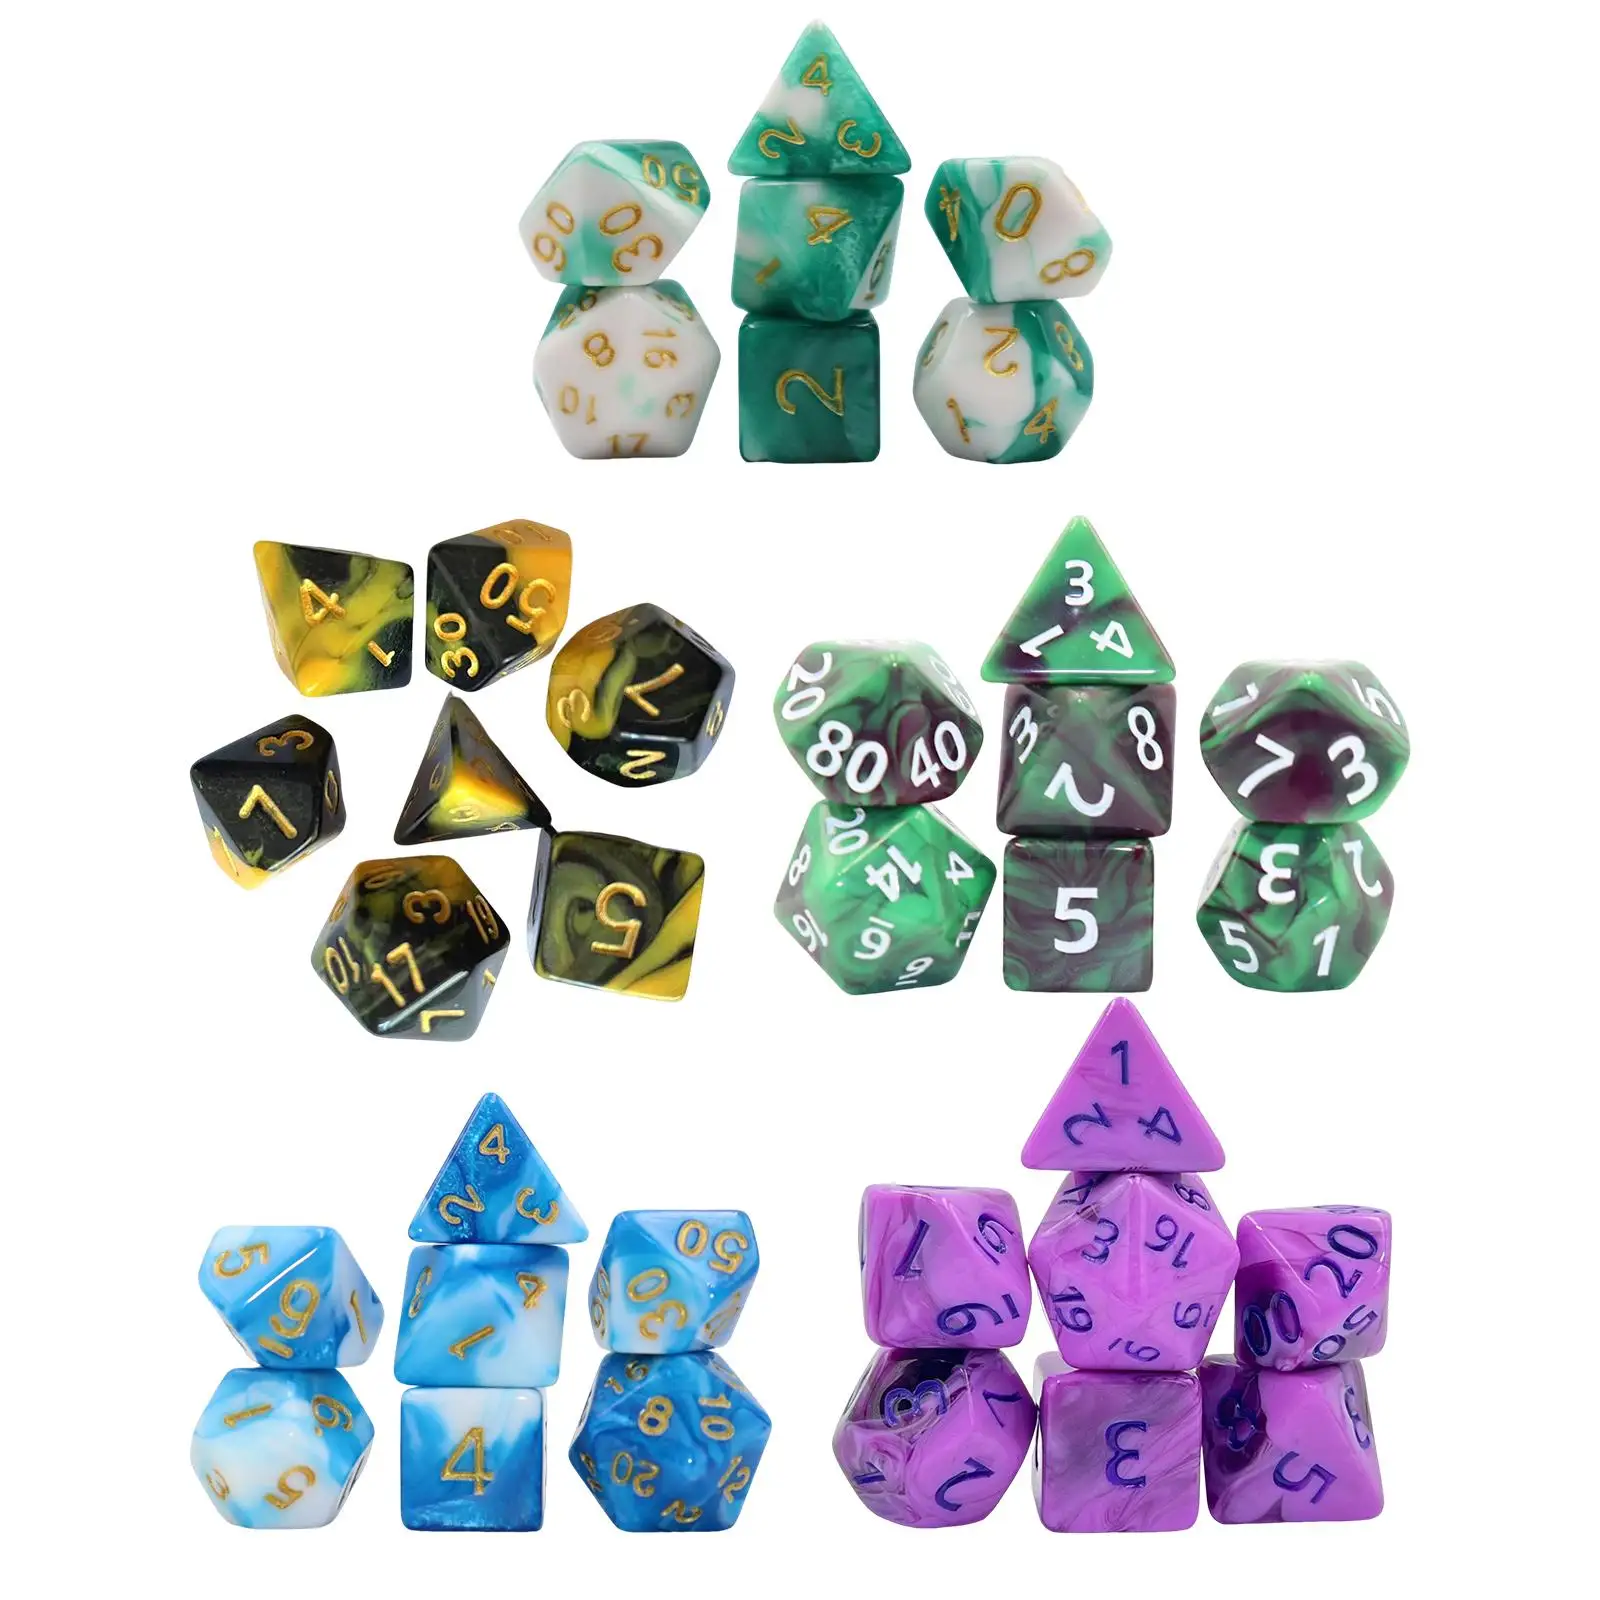 7x Polyhedral Dices Tabletop Games Game Dices for Party Supplies Board Game Props